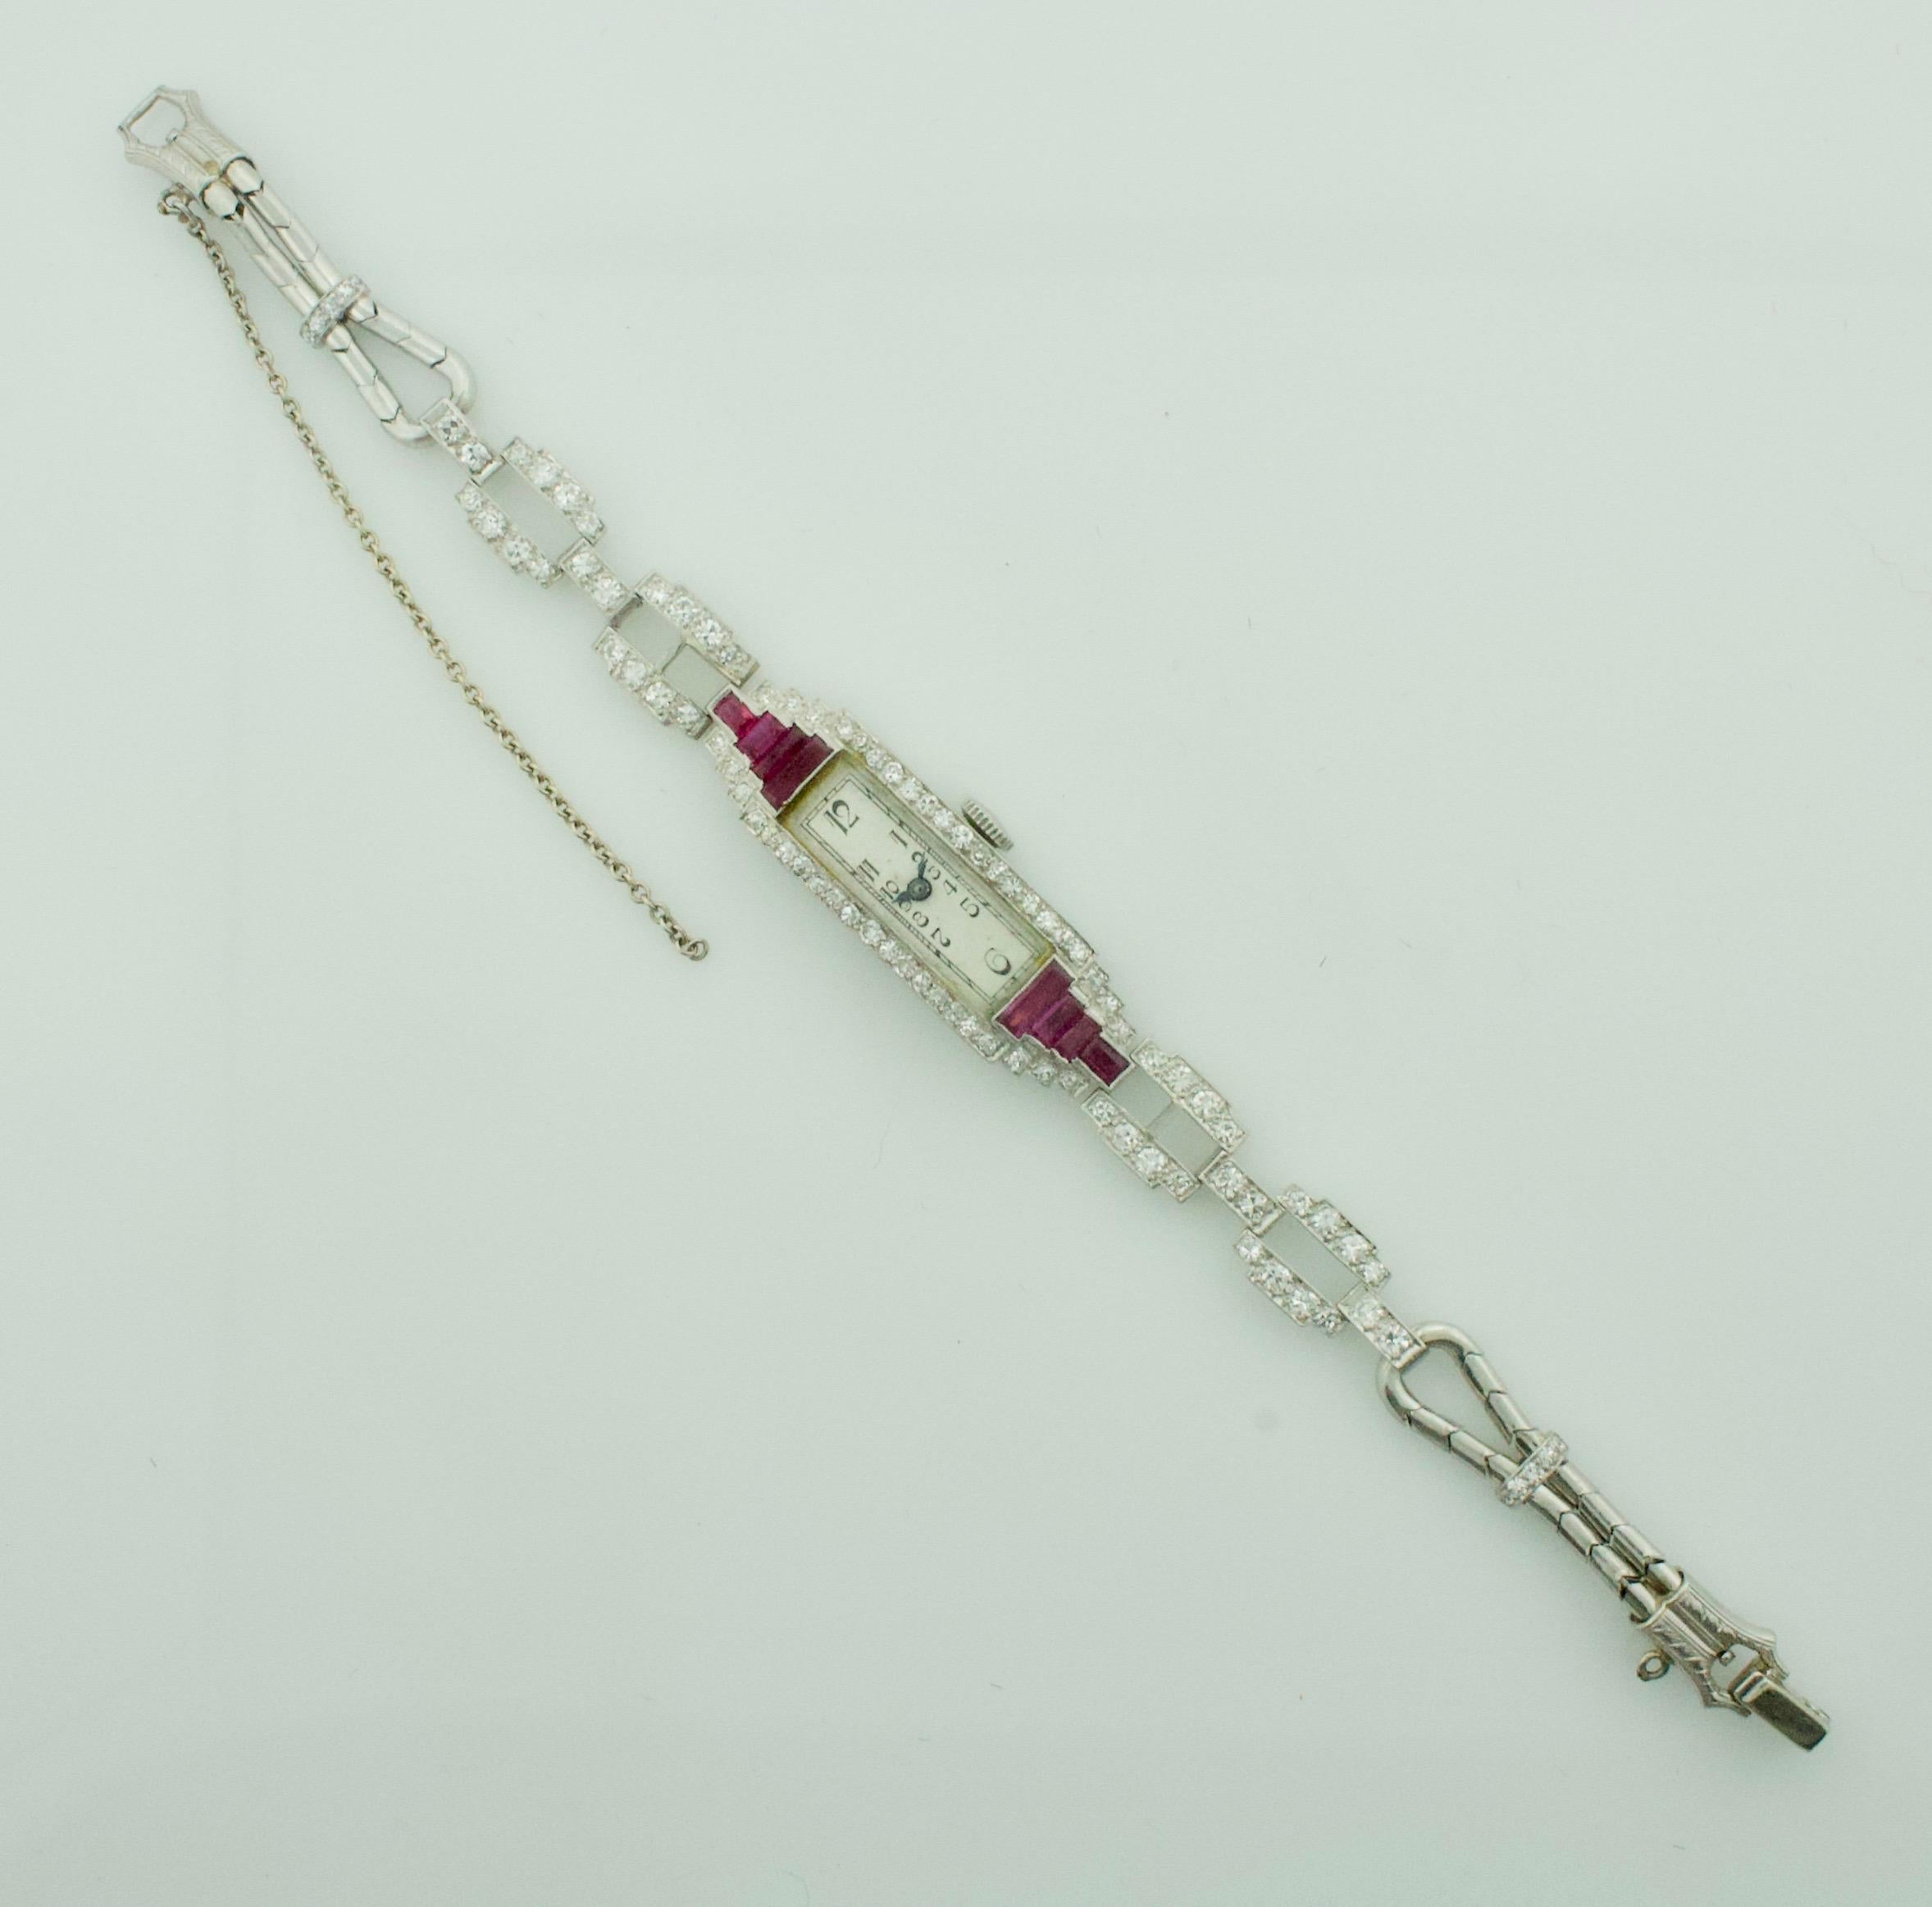 Baguette Cut Extreme Art Deco Ruby and Diamond Watch Circa 1920 - 1930 in Platinum